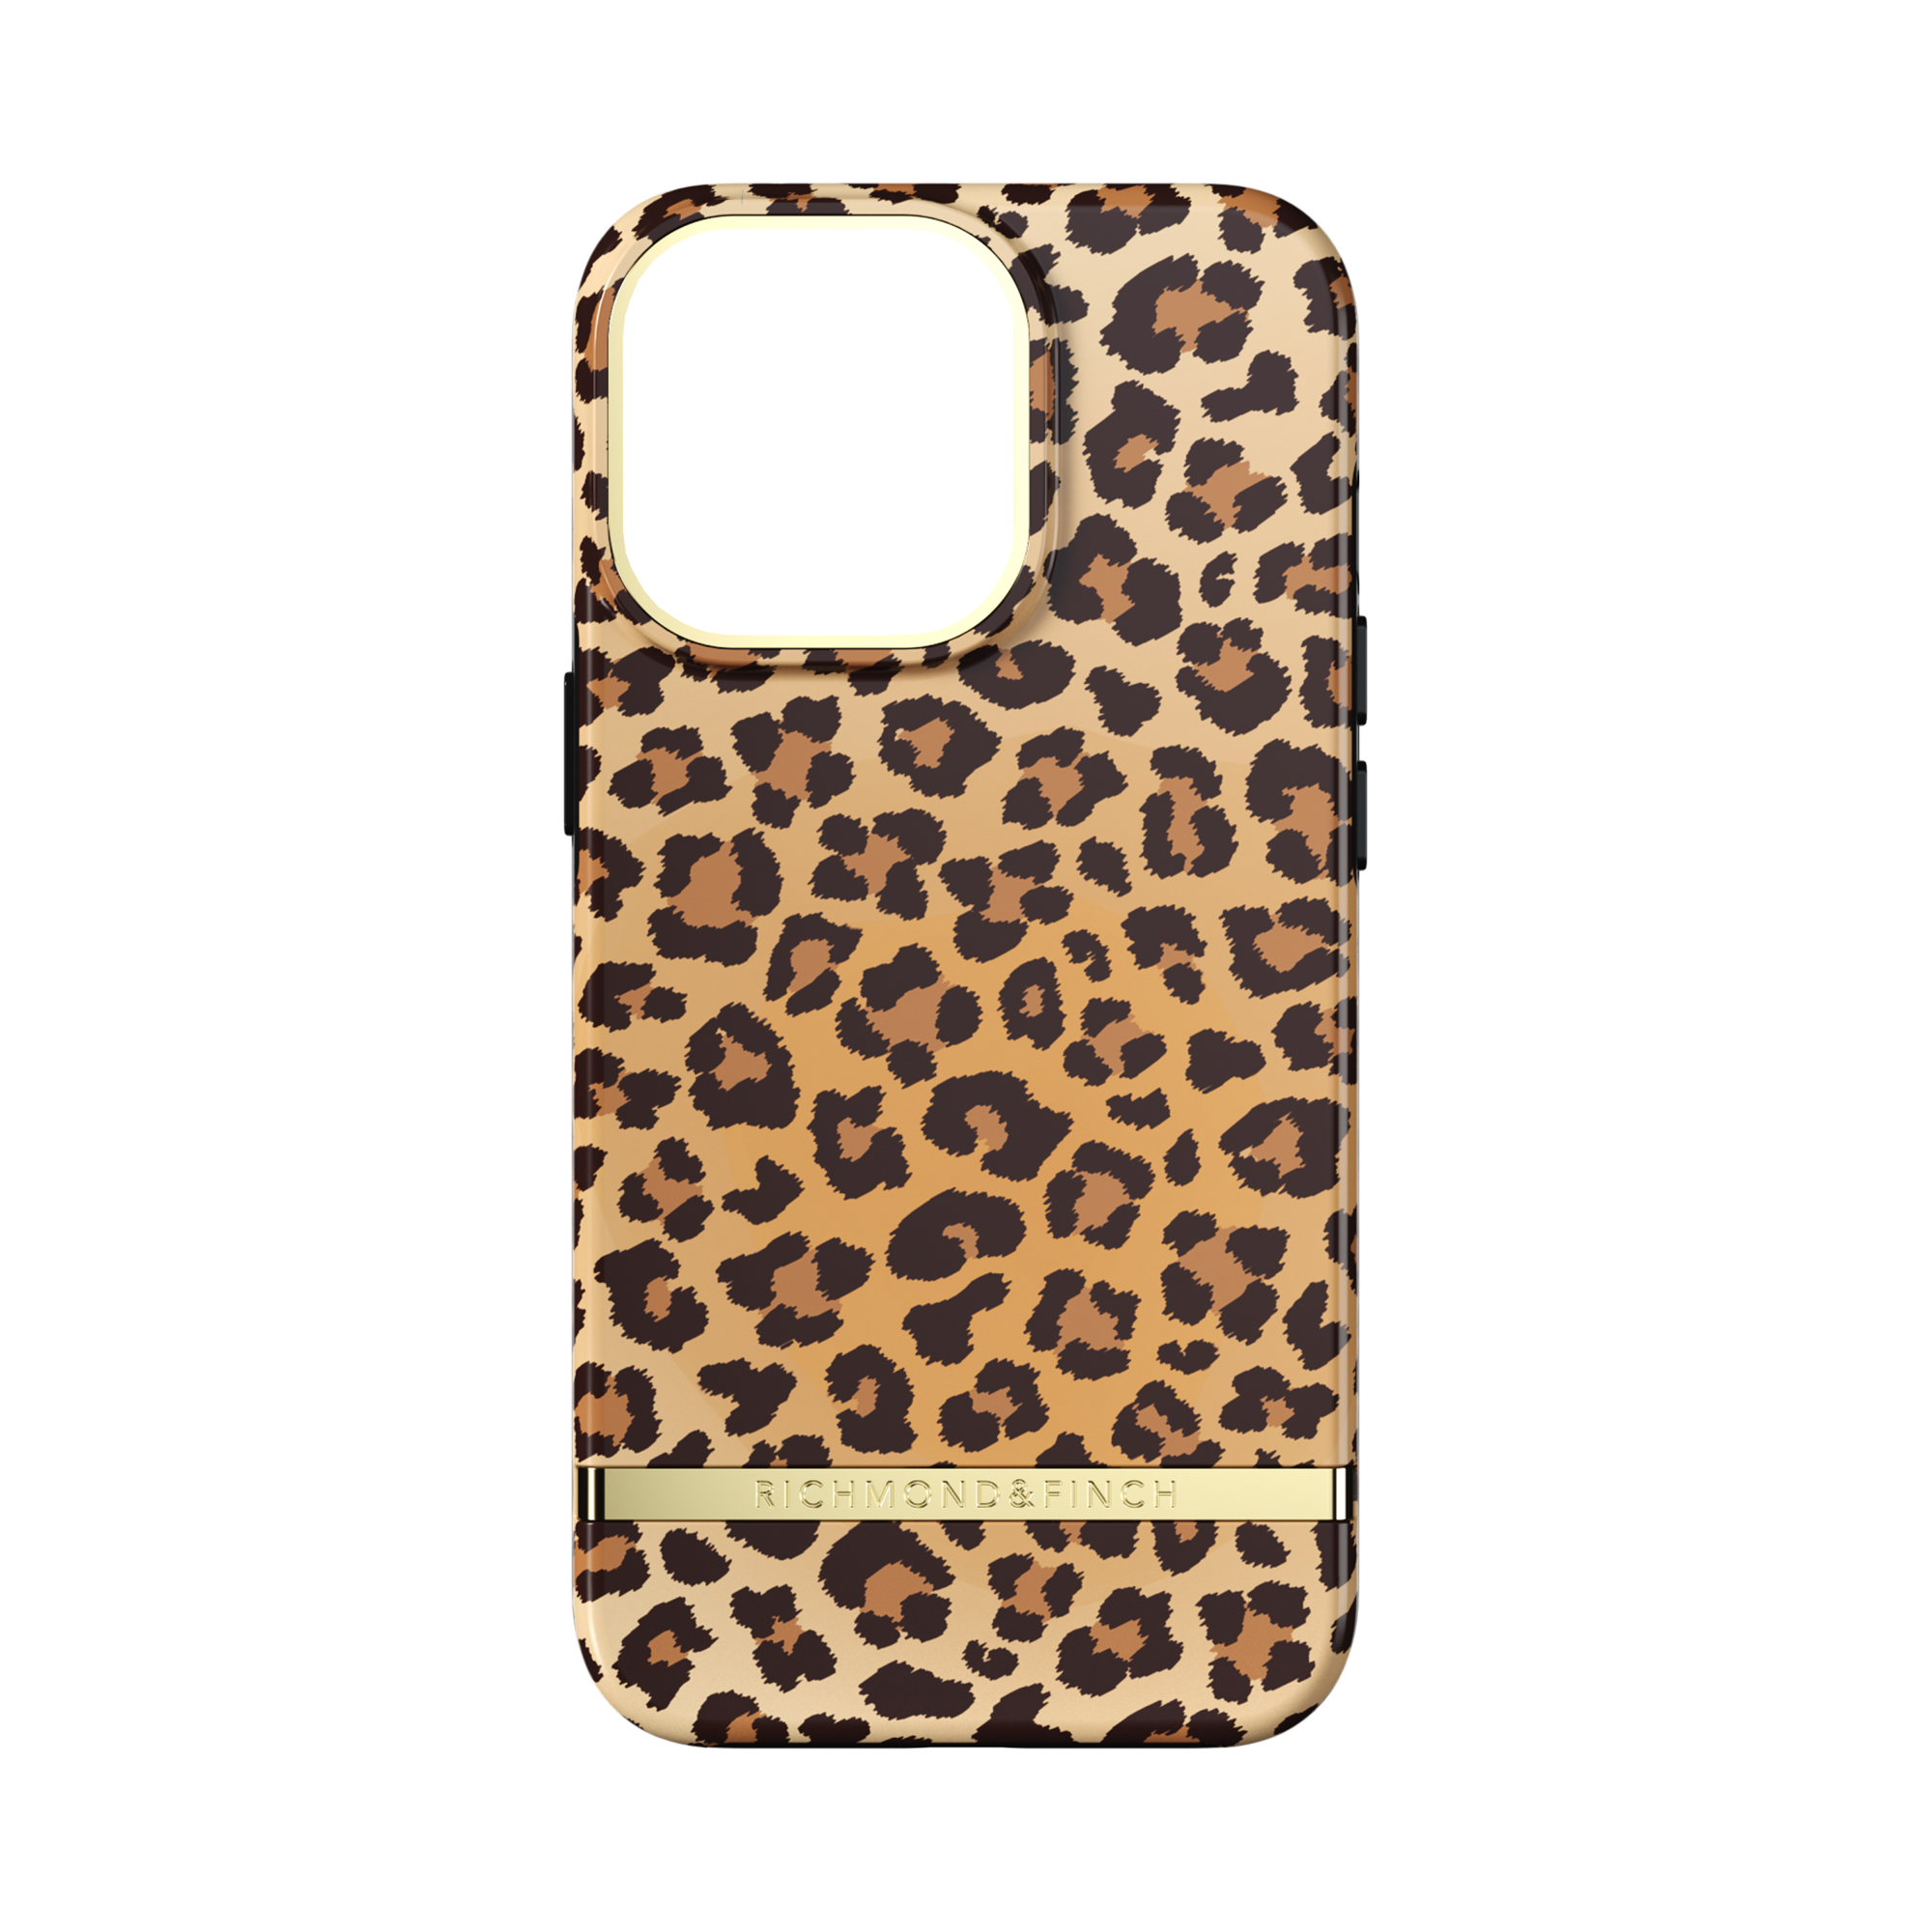 RICHMOND & FINCH Soft Backcover, PRO, 13 Leopard iPhone Pro, APPLE, 13 YELLOW IPHONE